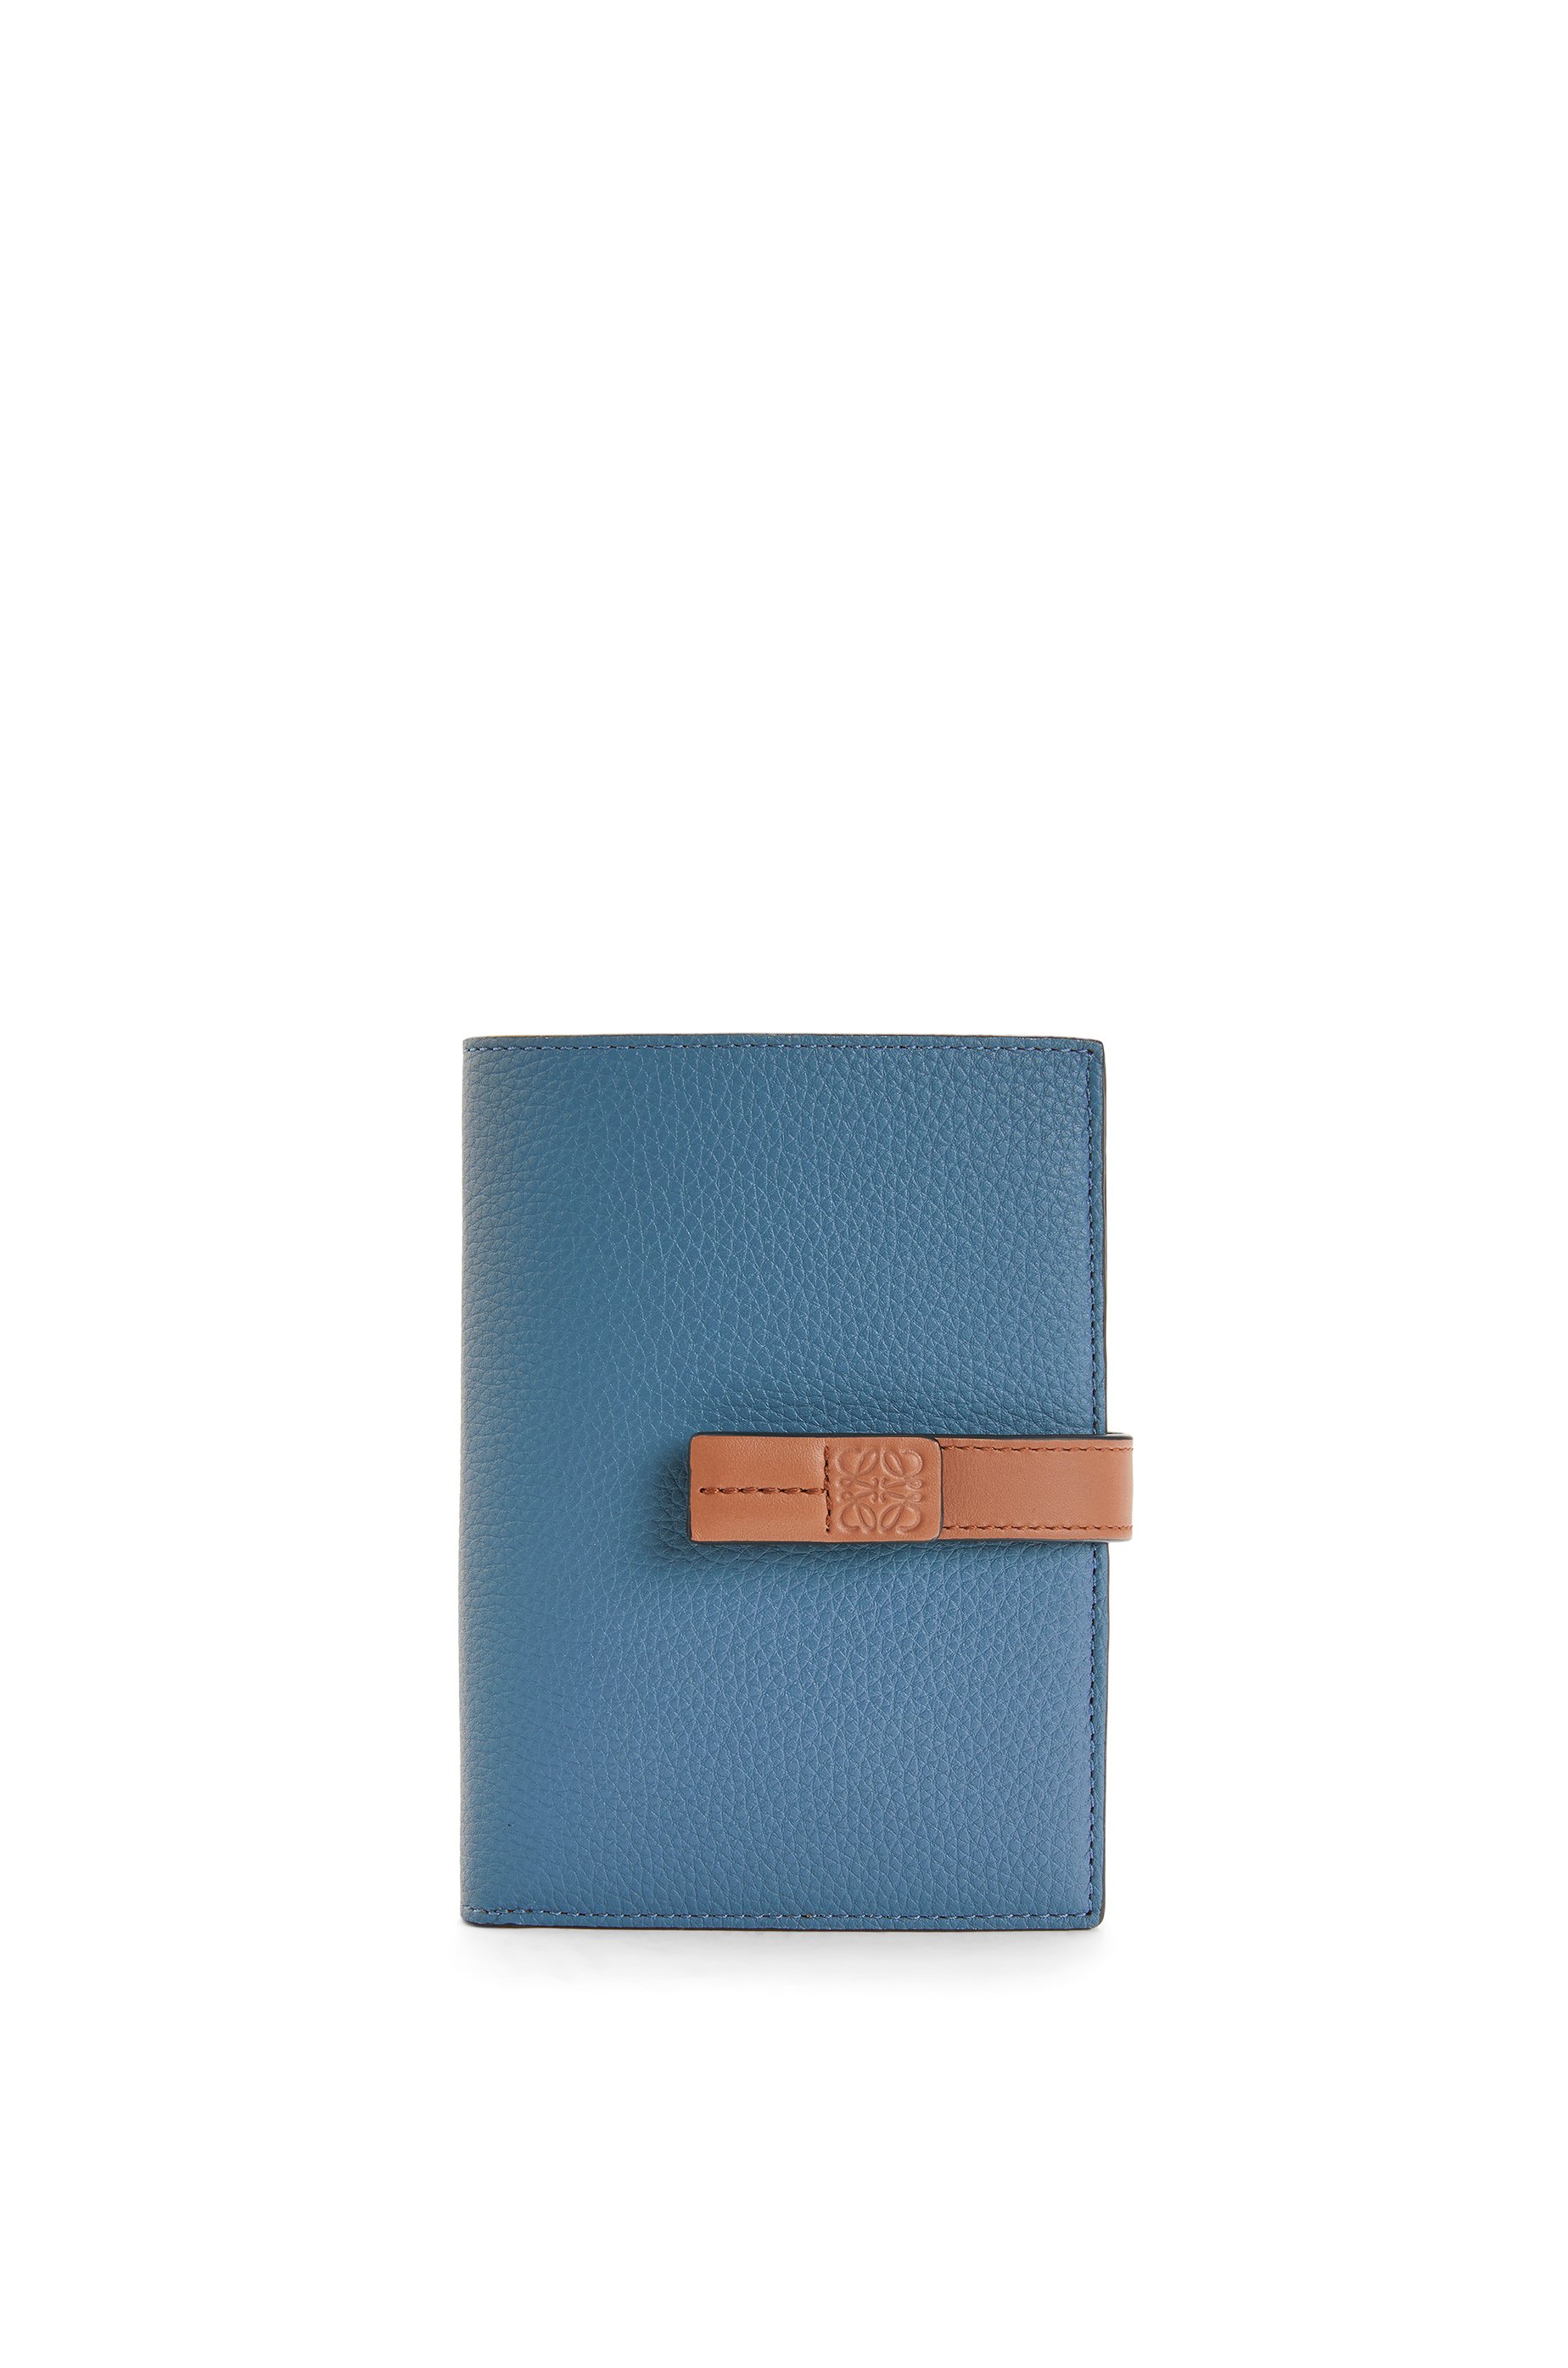 Luxury wallets \u0026 small leather goods 